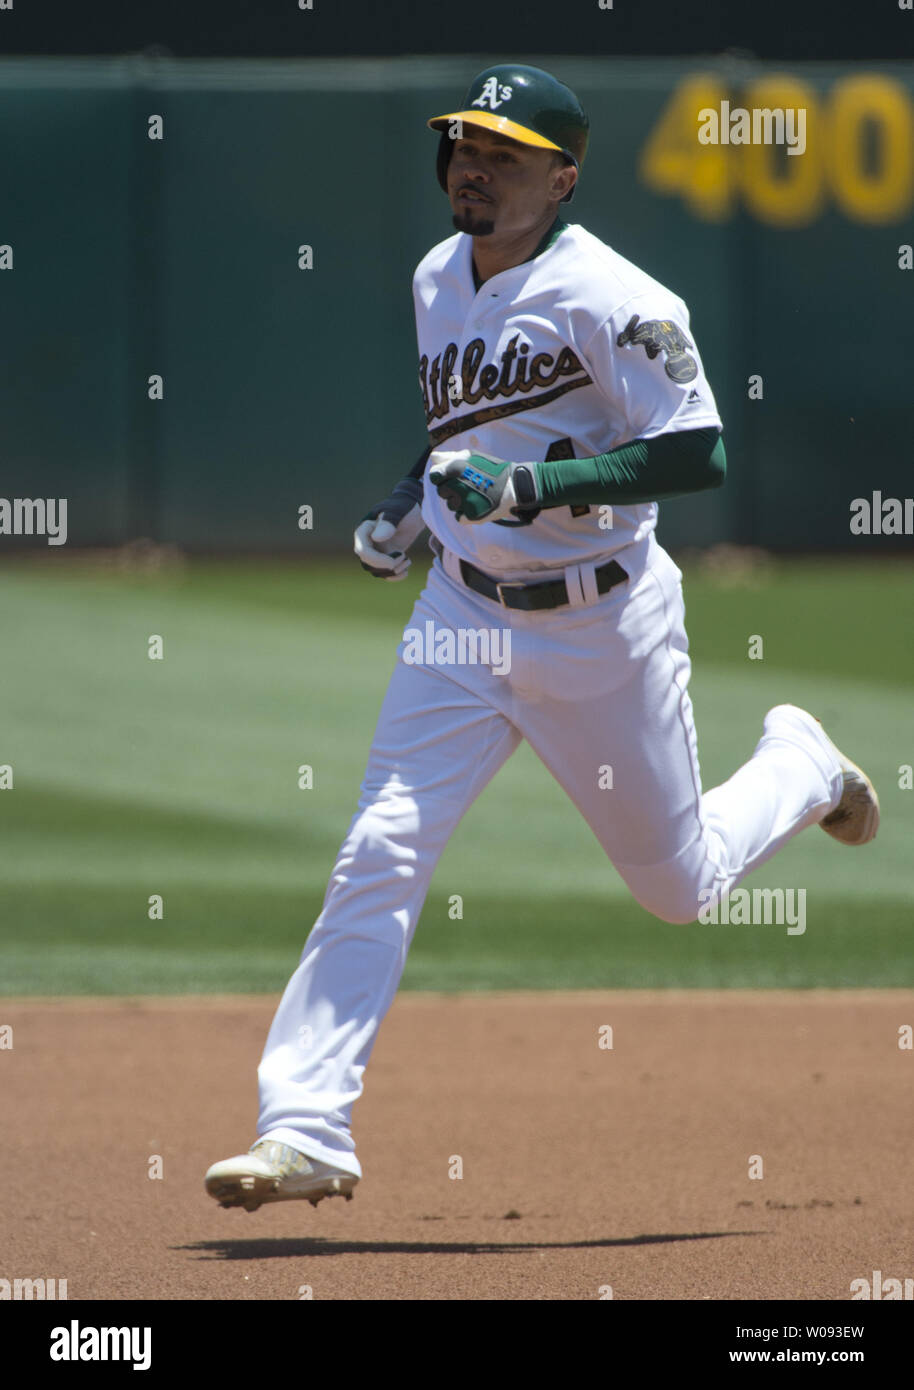 April 3, 2014: Coco Crisp's HR in 12th gives A's win over Mariners